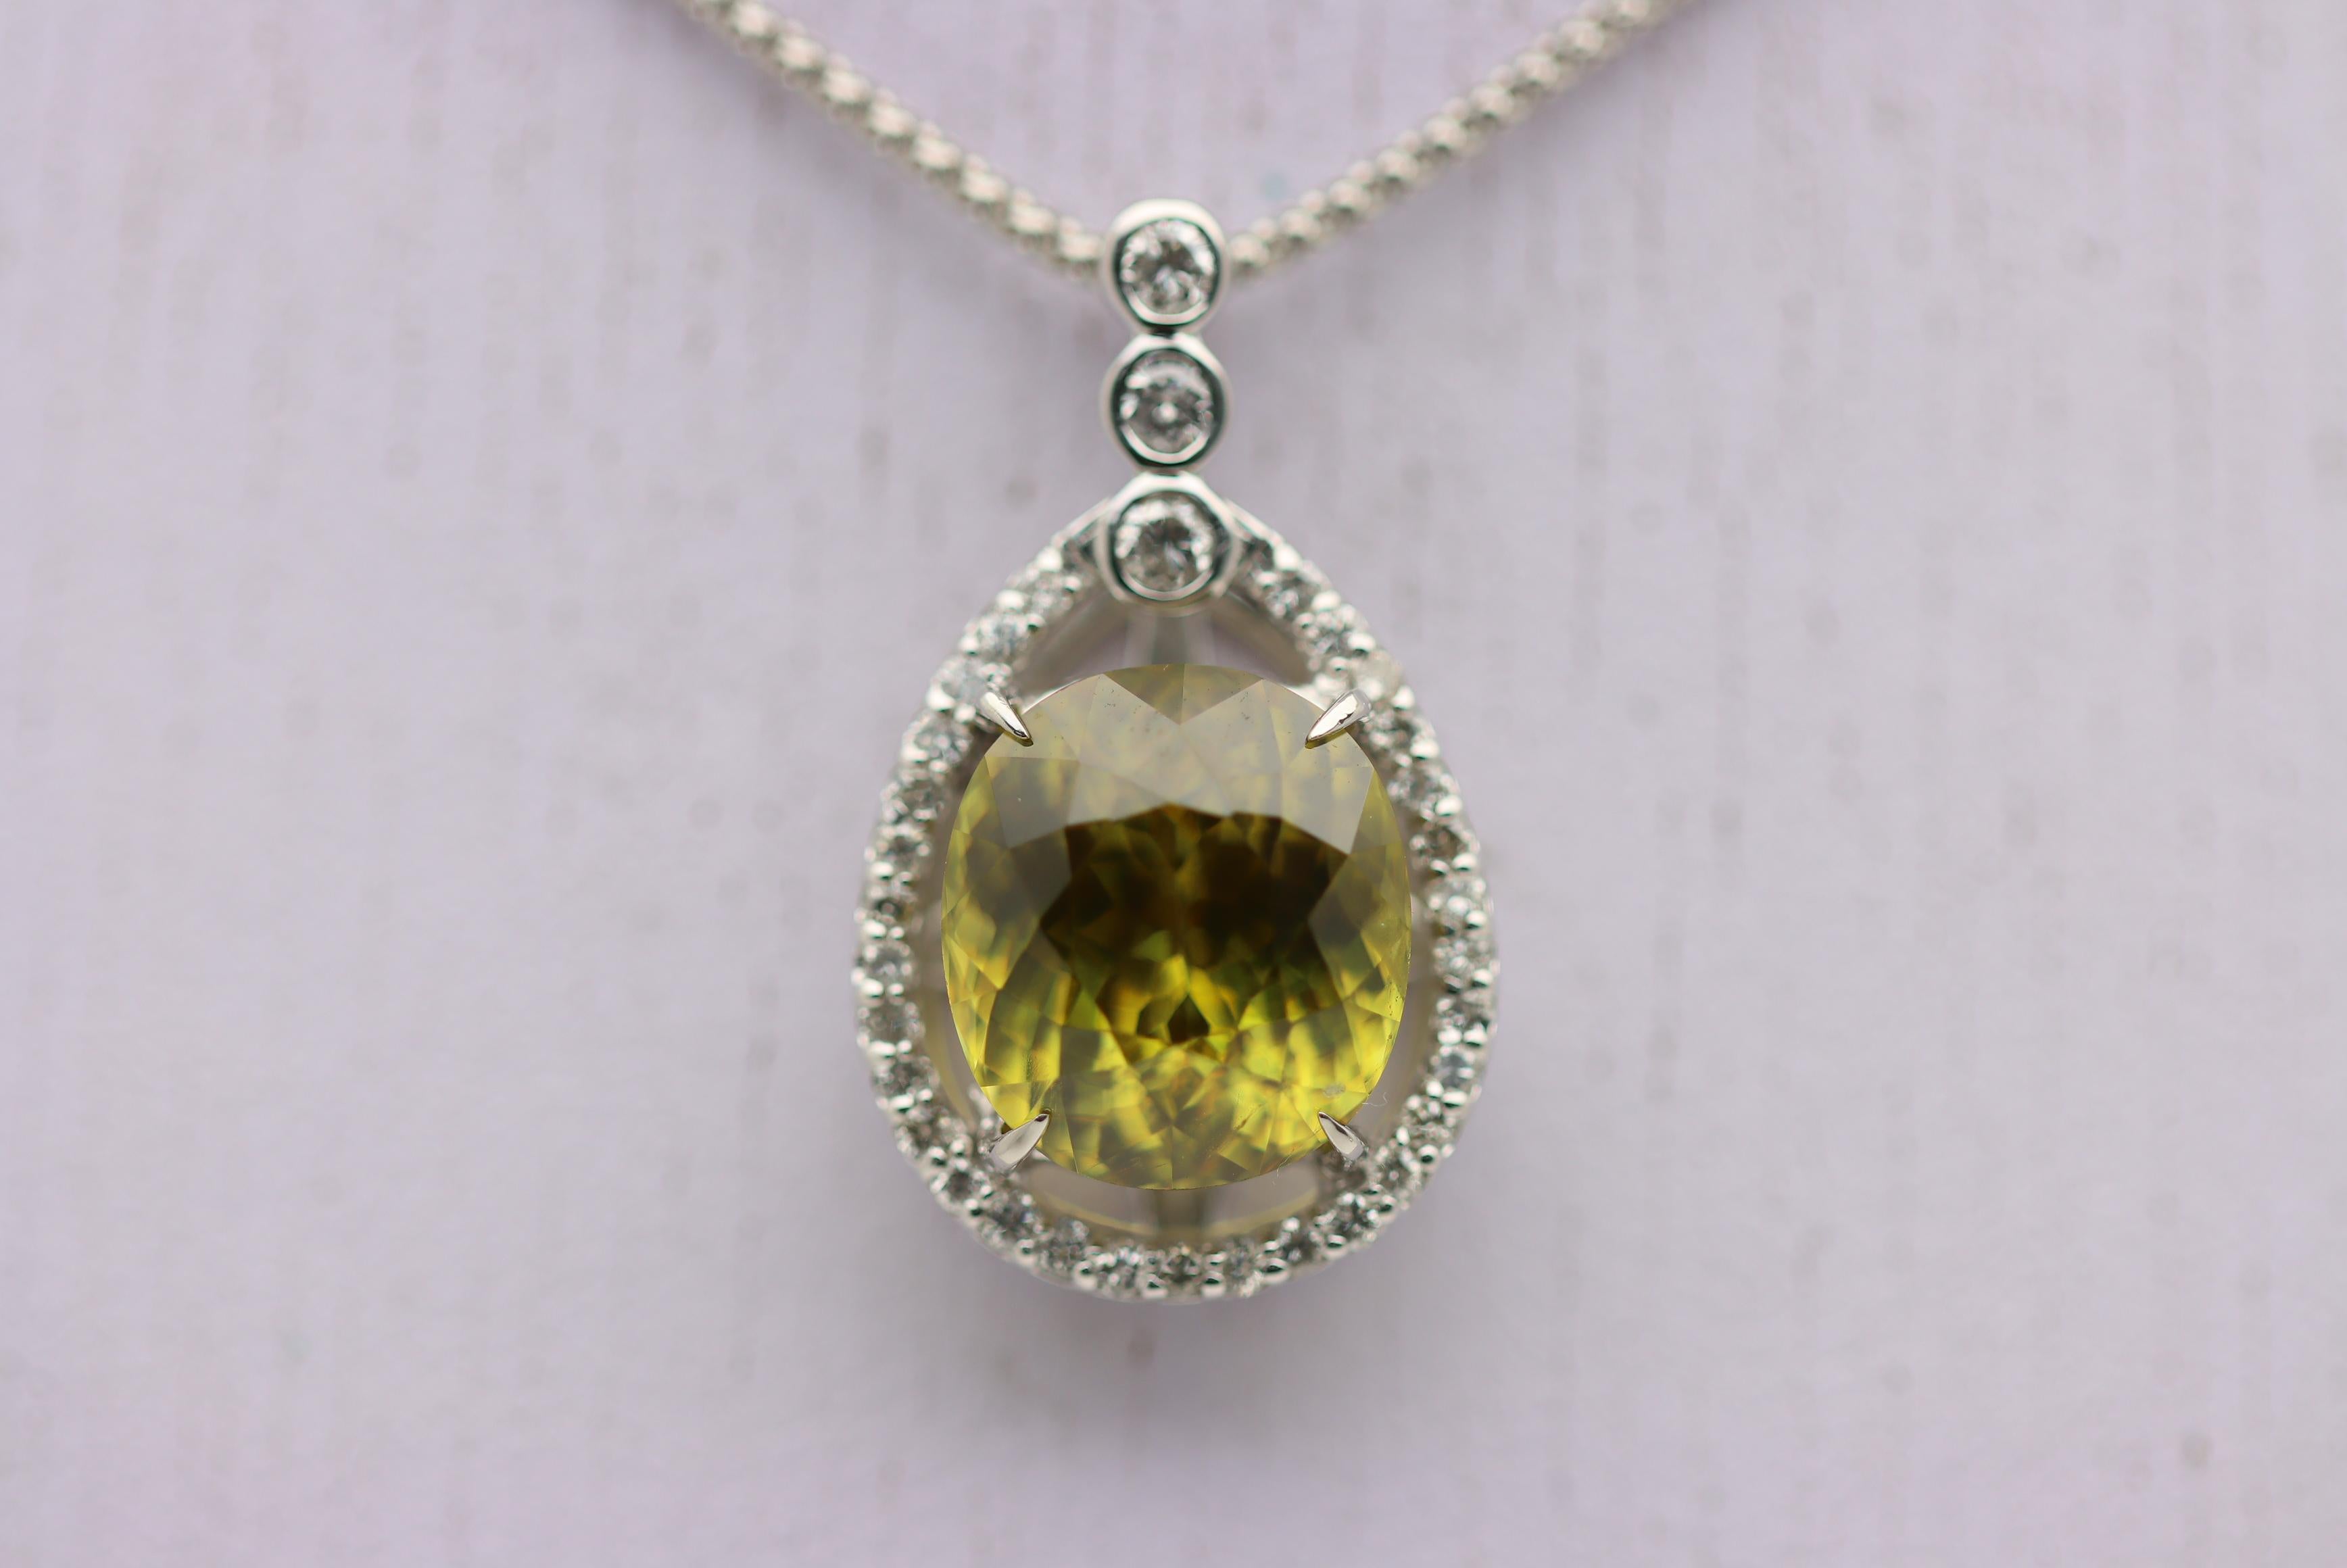 A superb example of a gem quality sphene weighing an impressive 8.61 carats. Sphene is known for its high refractive index and amazing levels of fire. The gem displays a stunning array of color flashes due to its refractive index which is higher